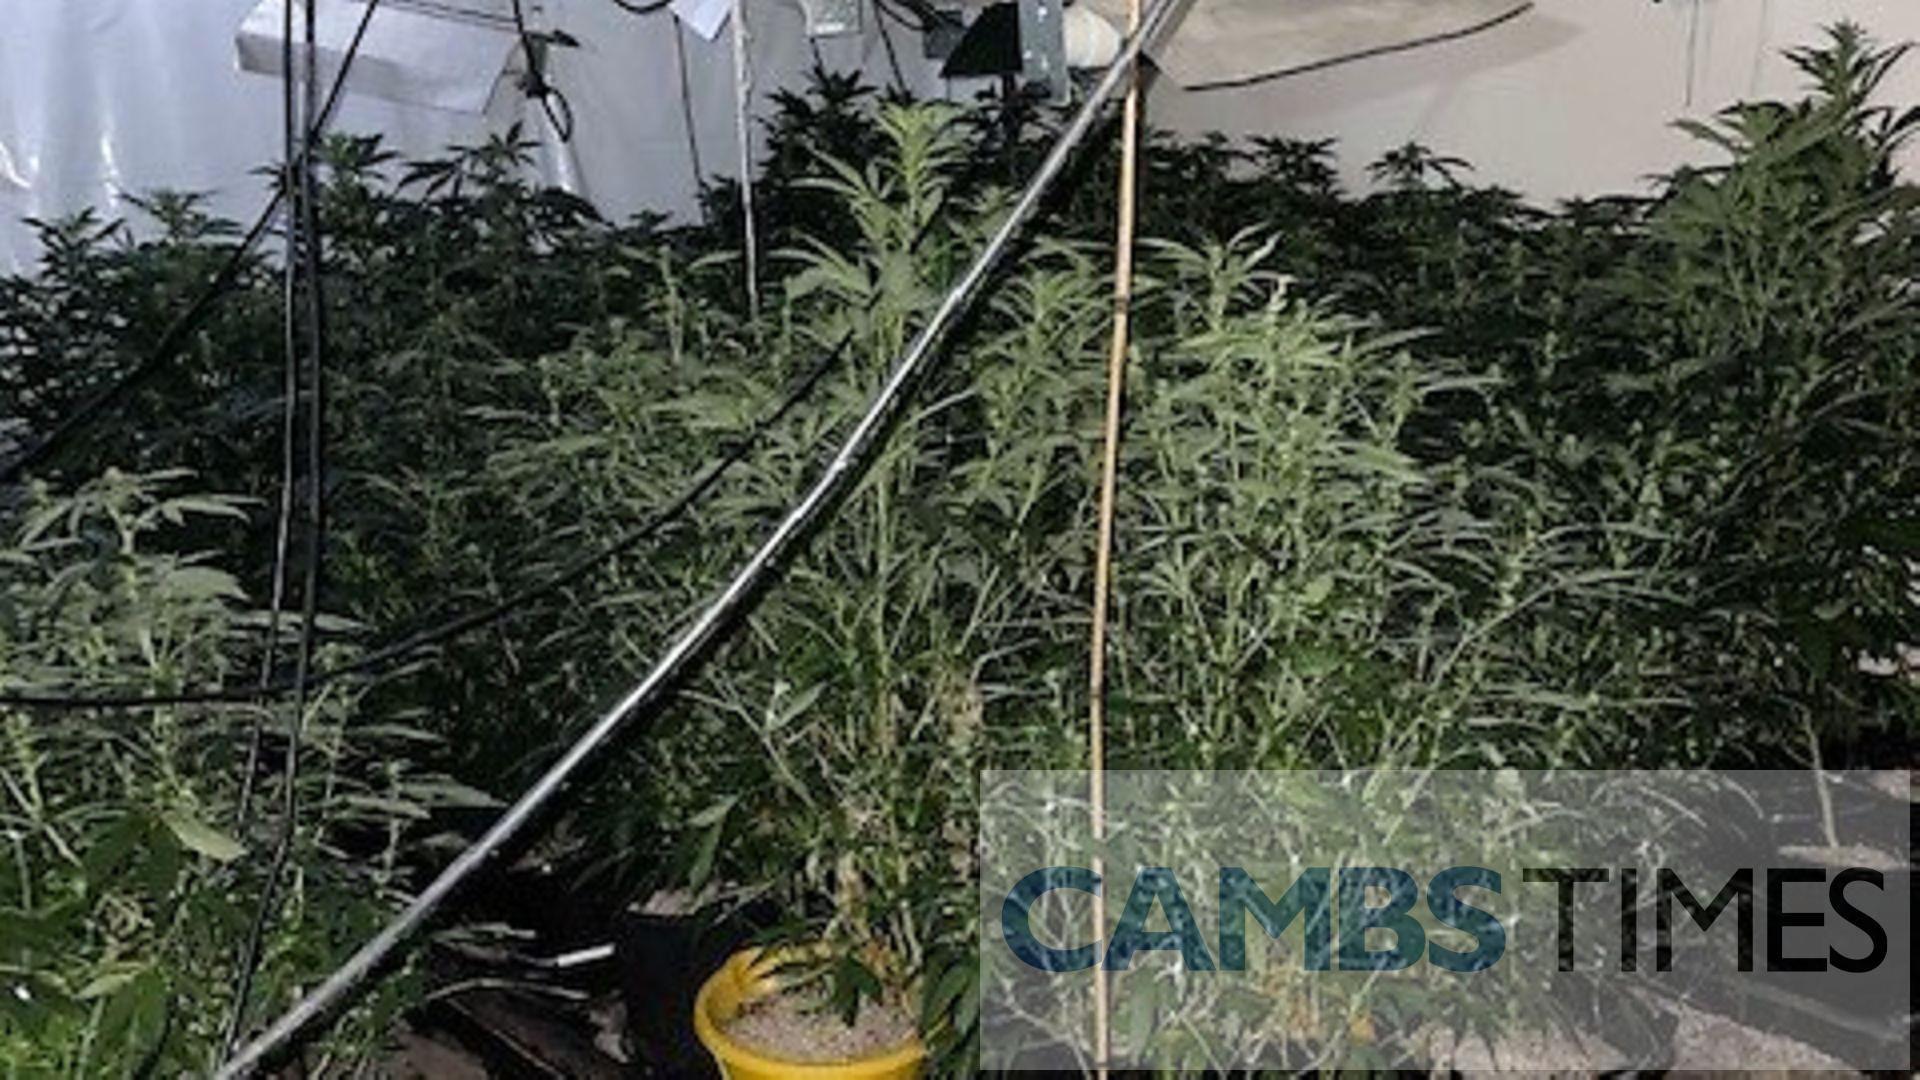 Man in court after more than £656k of cannabis seized